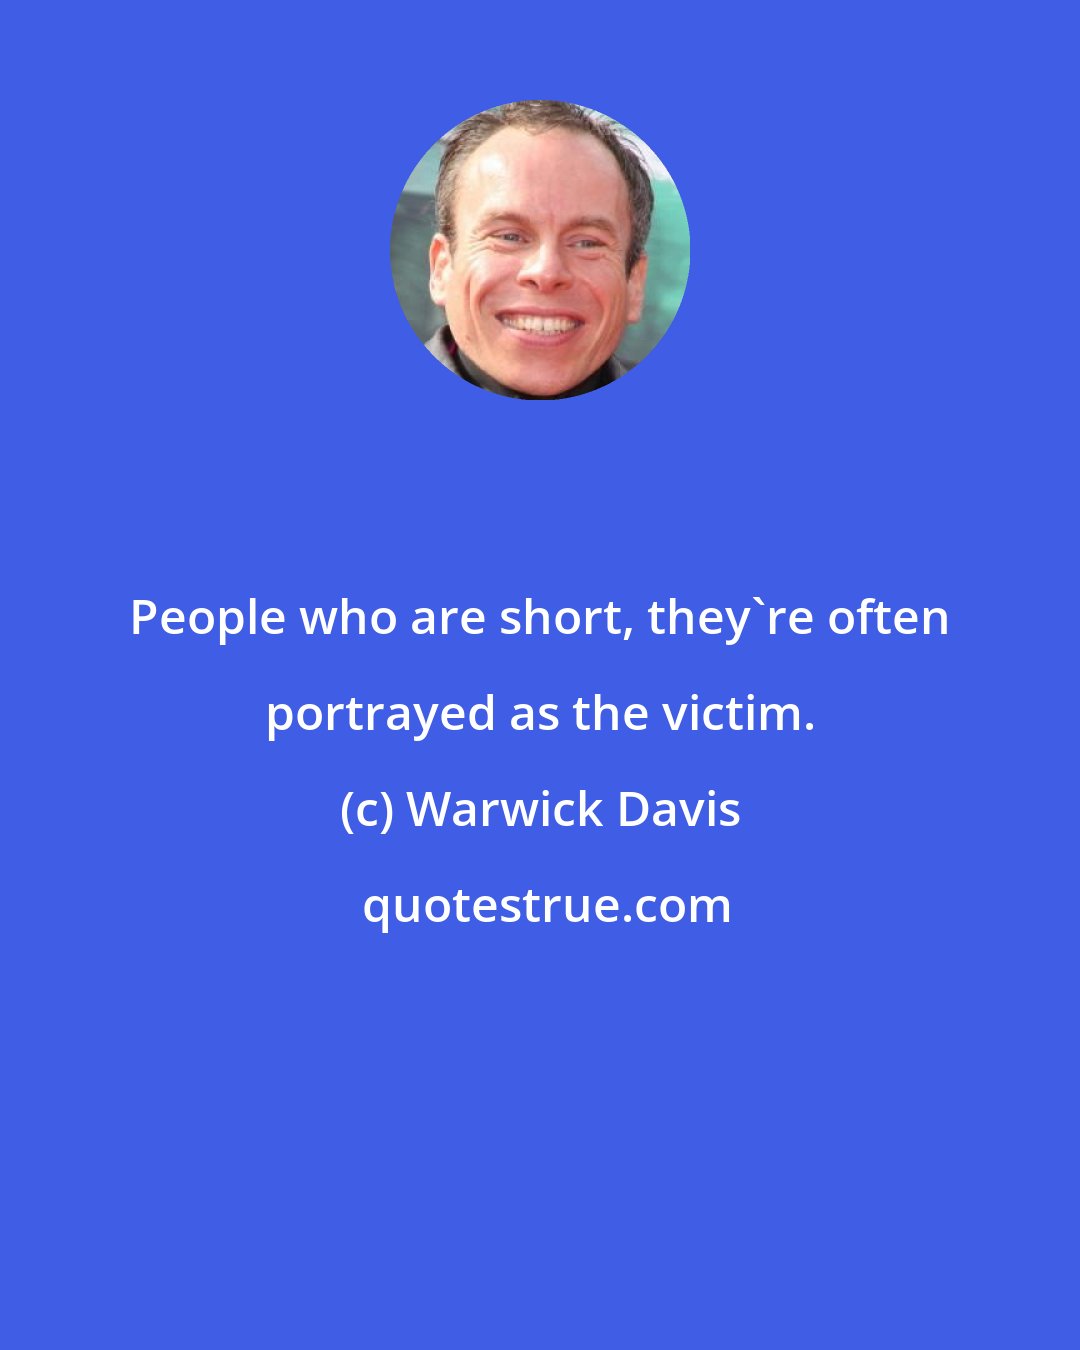 Warwick Davis: People who are short, they're often portrayed as the victim.